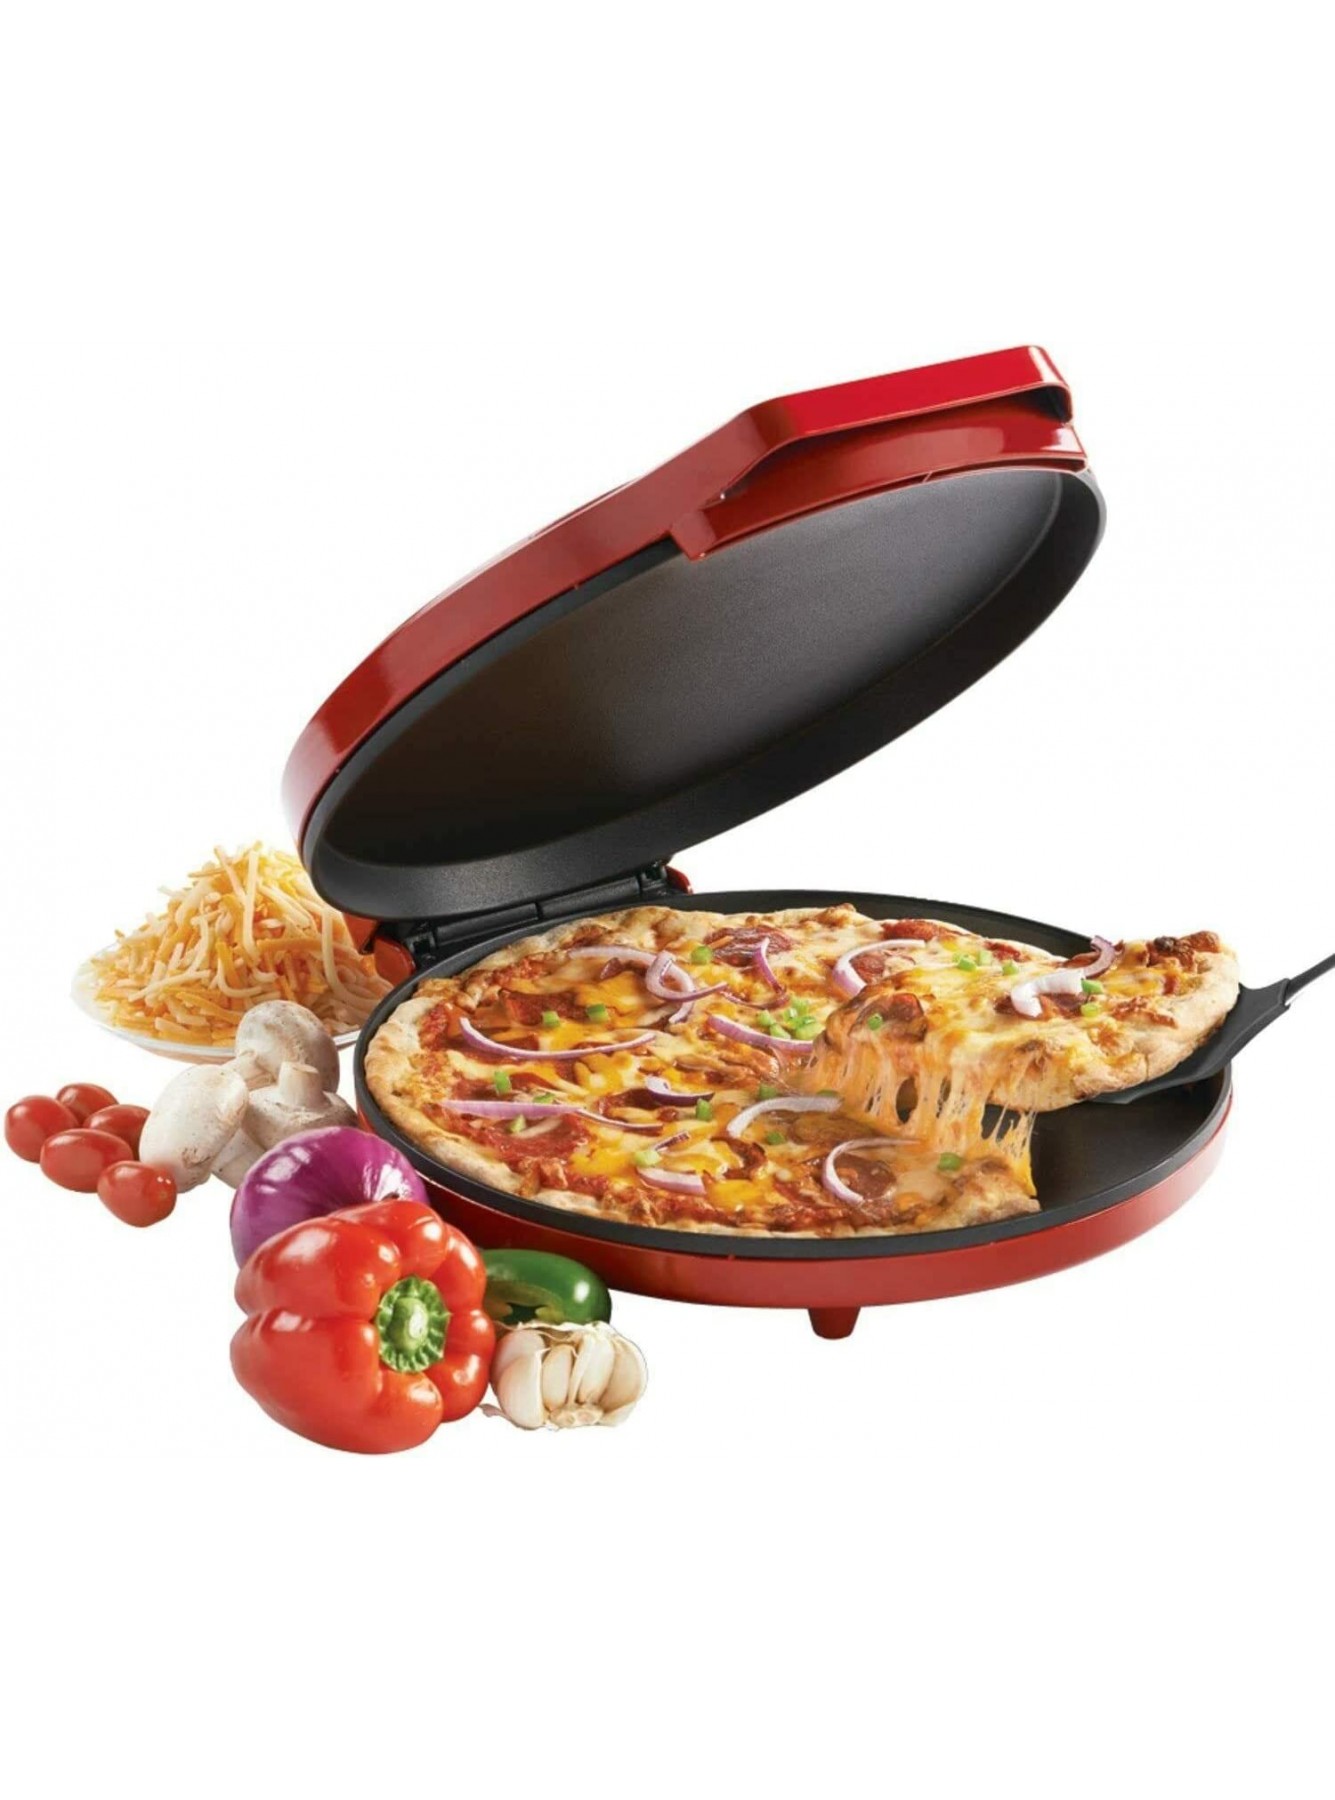 Pizza Maker 1440 Watts Red Fast Fun Energy Efficient Bc-2958cr | Robbies Warehouse B08SMQY3NG